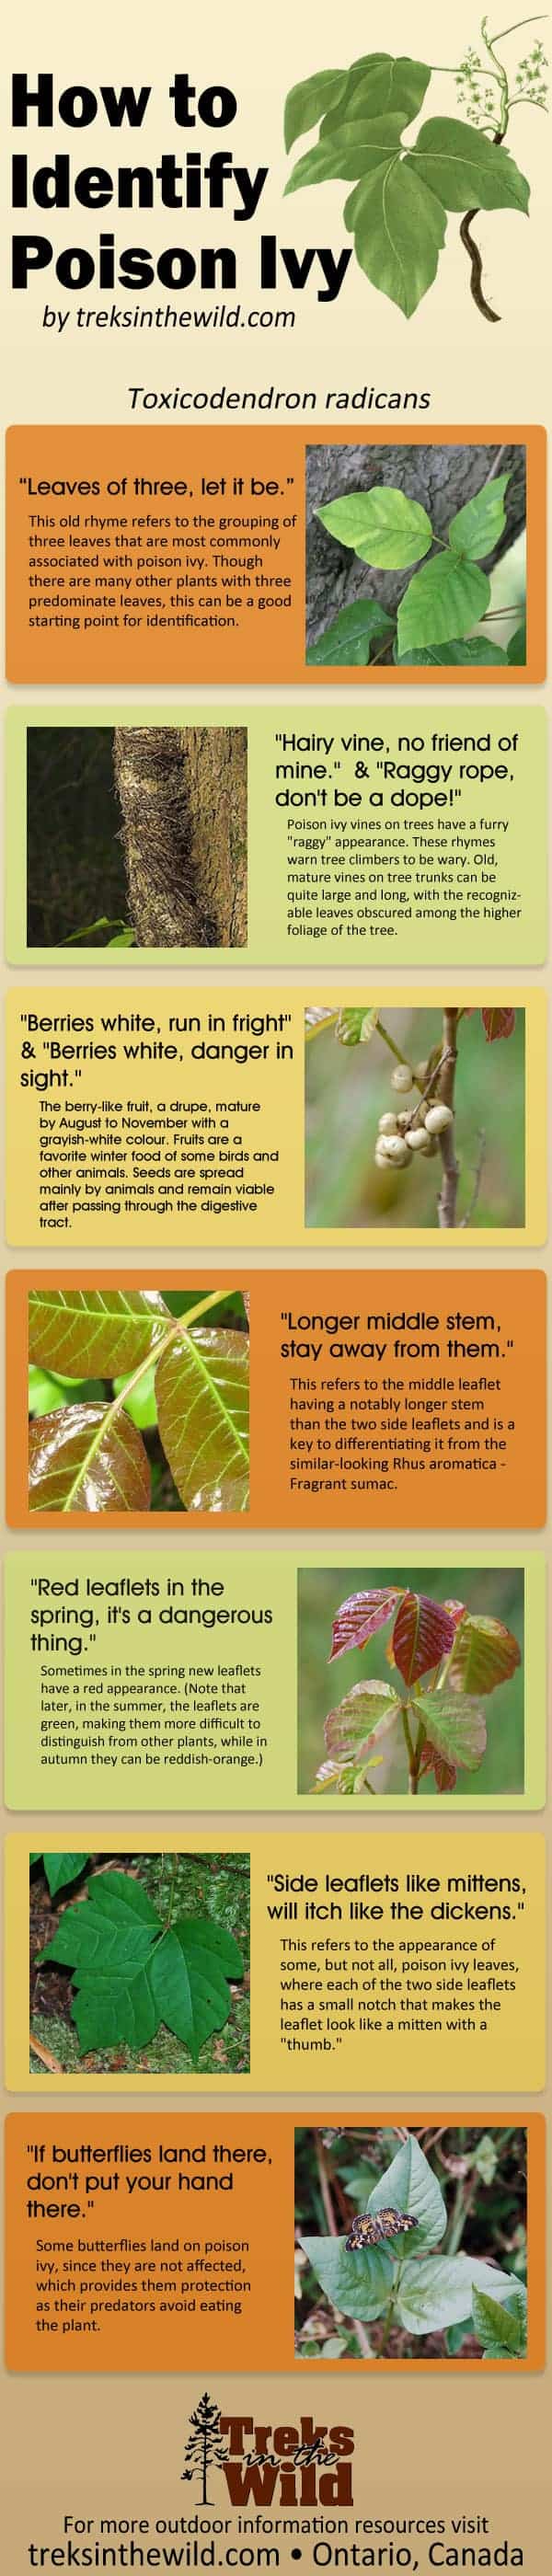 How to Identify Poison Ivy Infographic